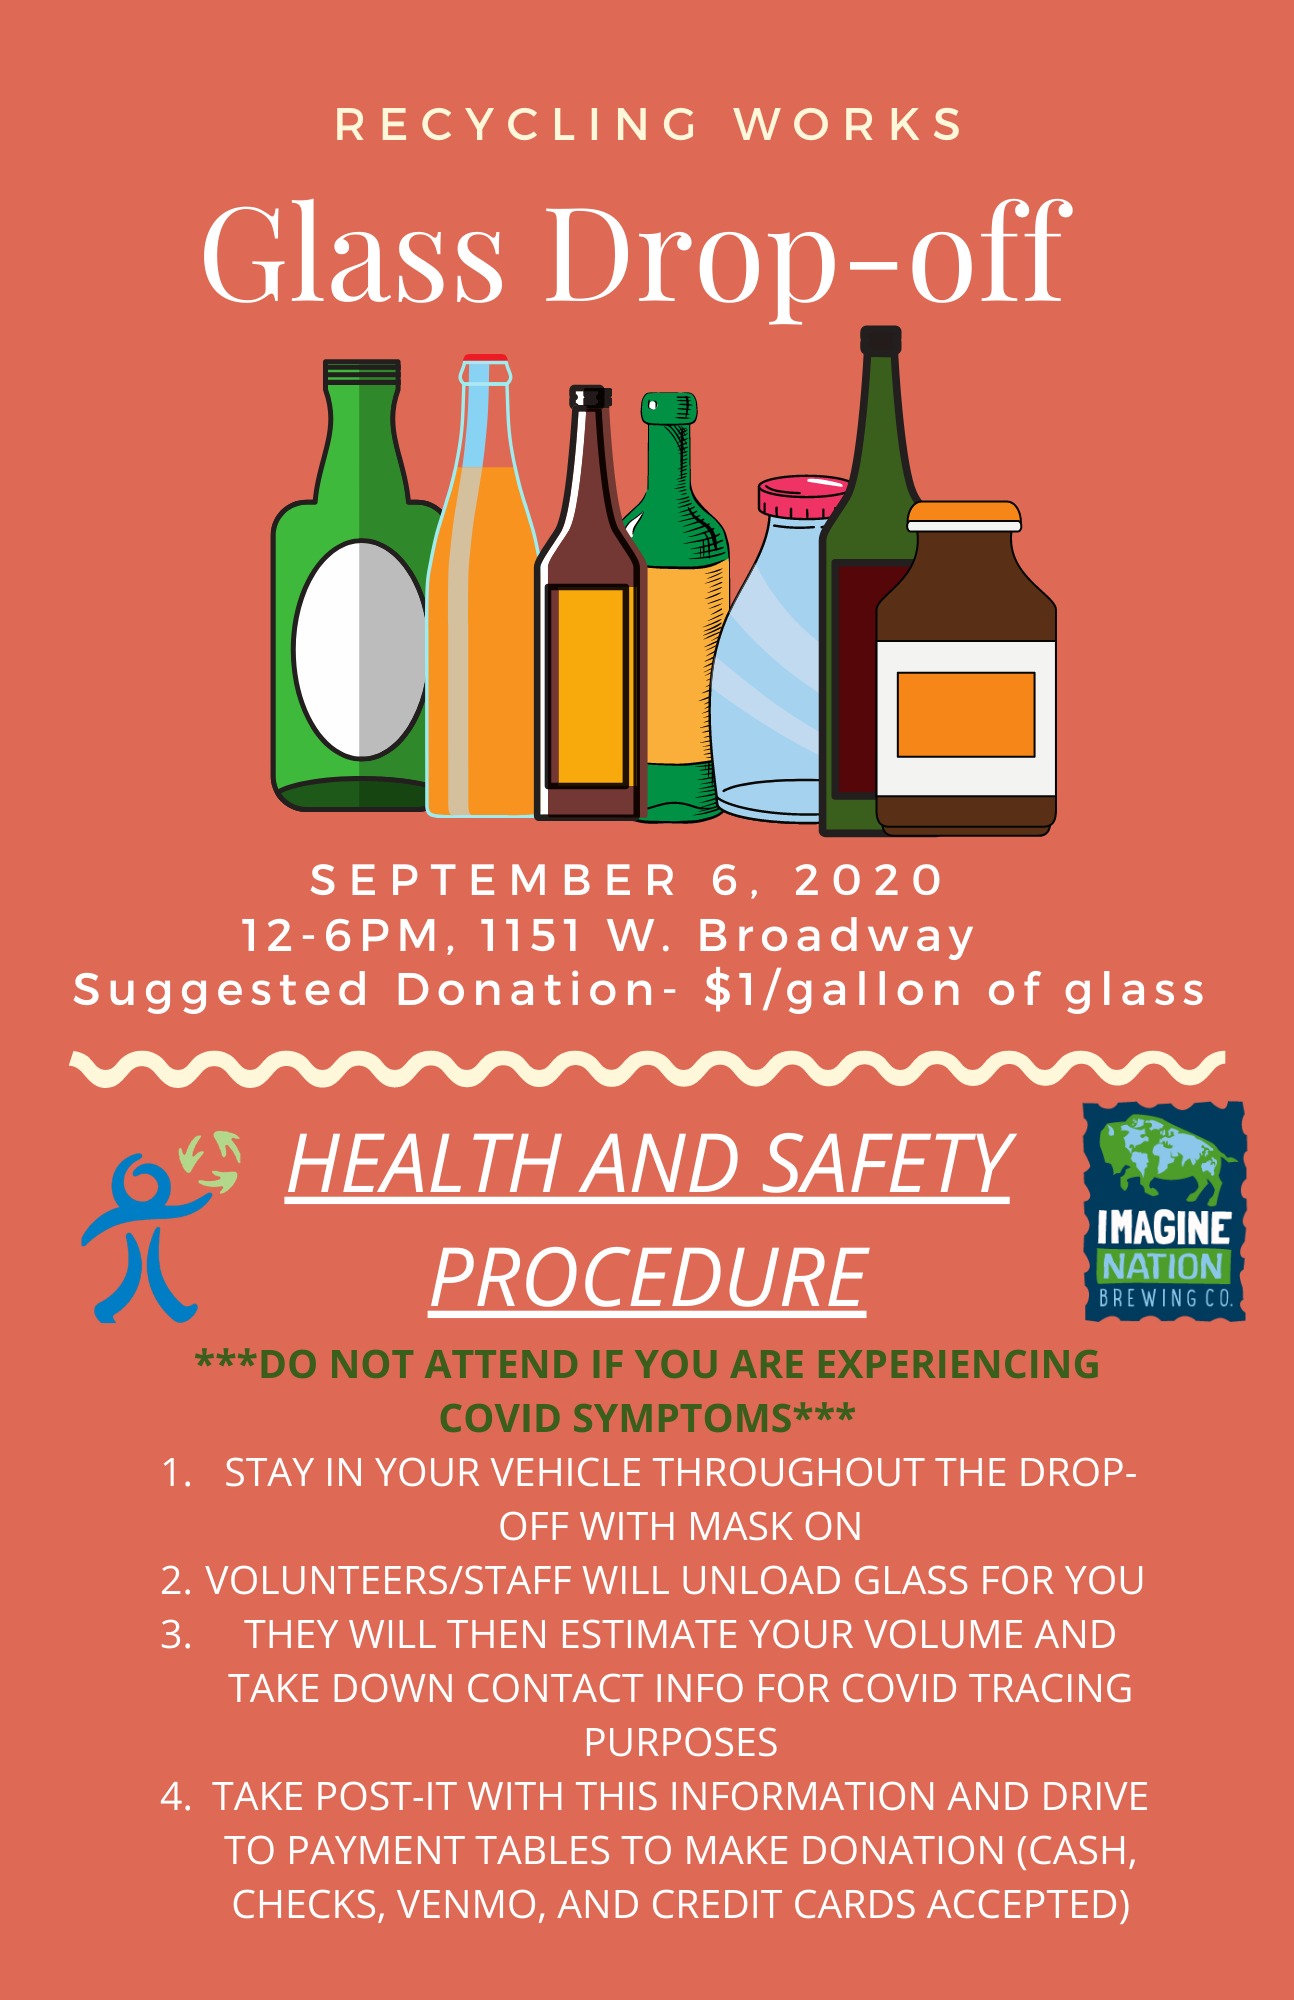 Update for September 6th Glass Drop-off